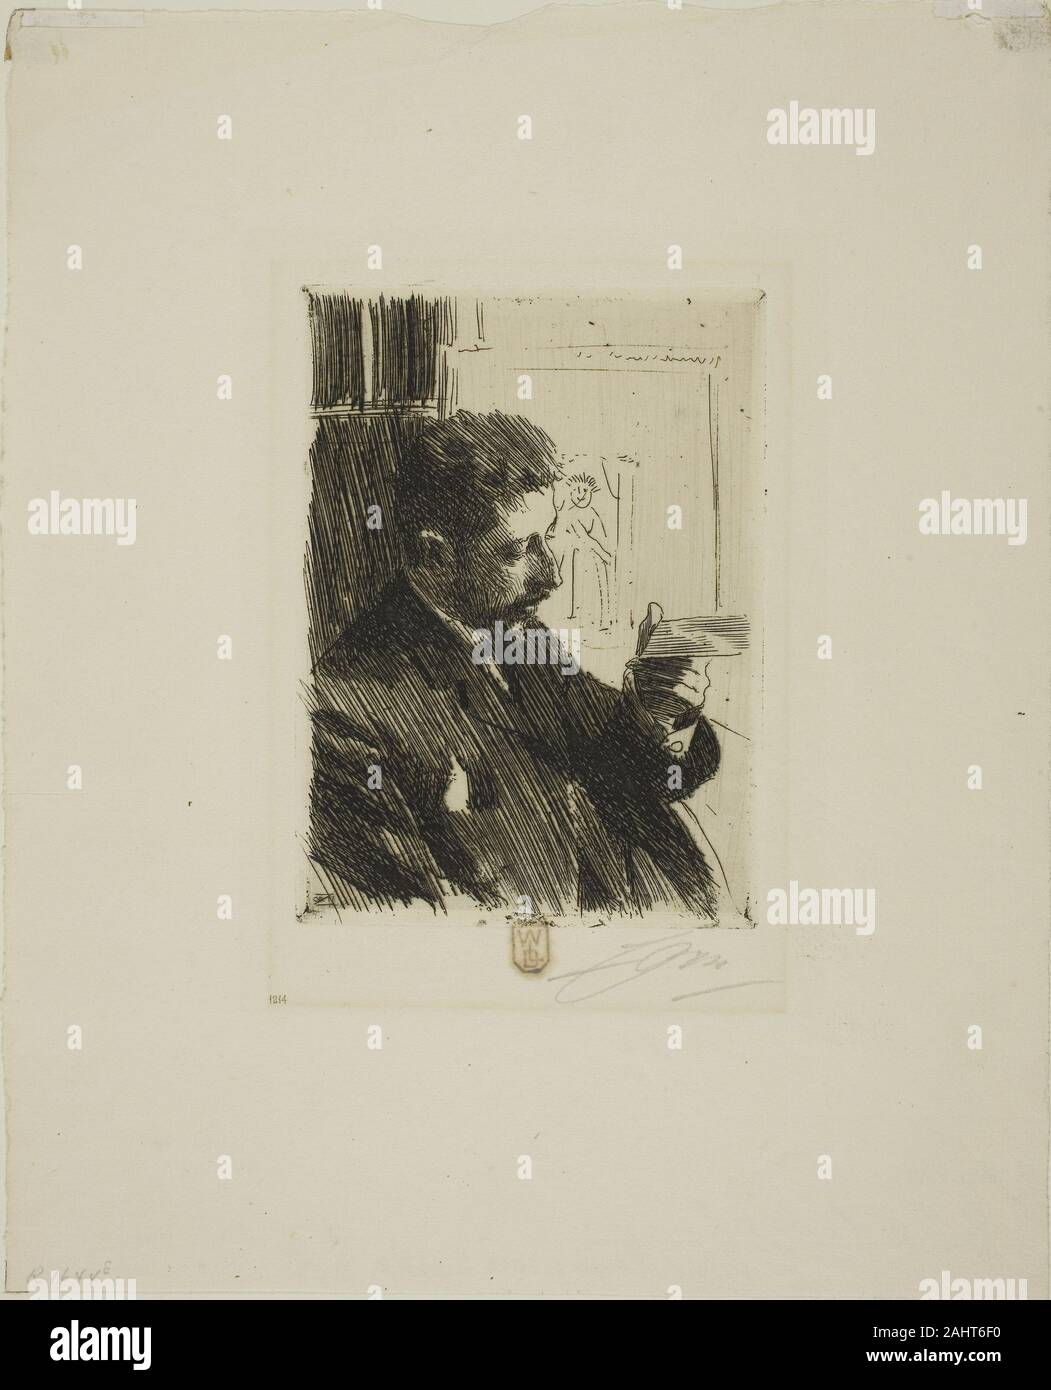 Anders Zorn. H. R. H. Prince Eugen of Sweden. 1891. Sweden. Etching on ivory laid paper Stock Photo